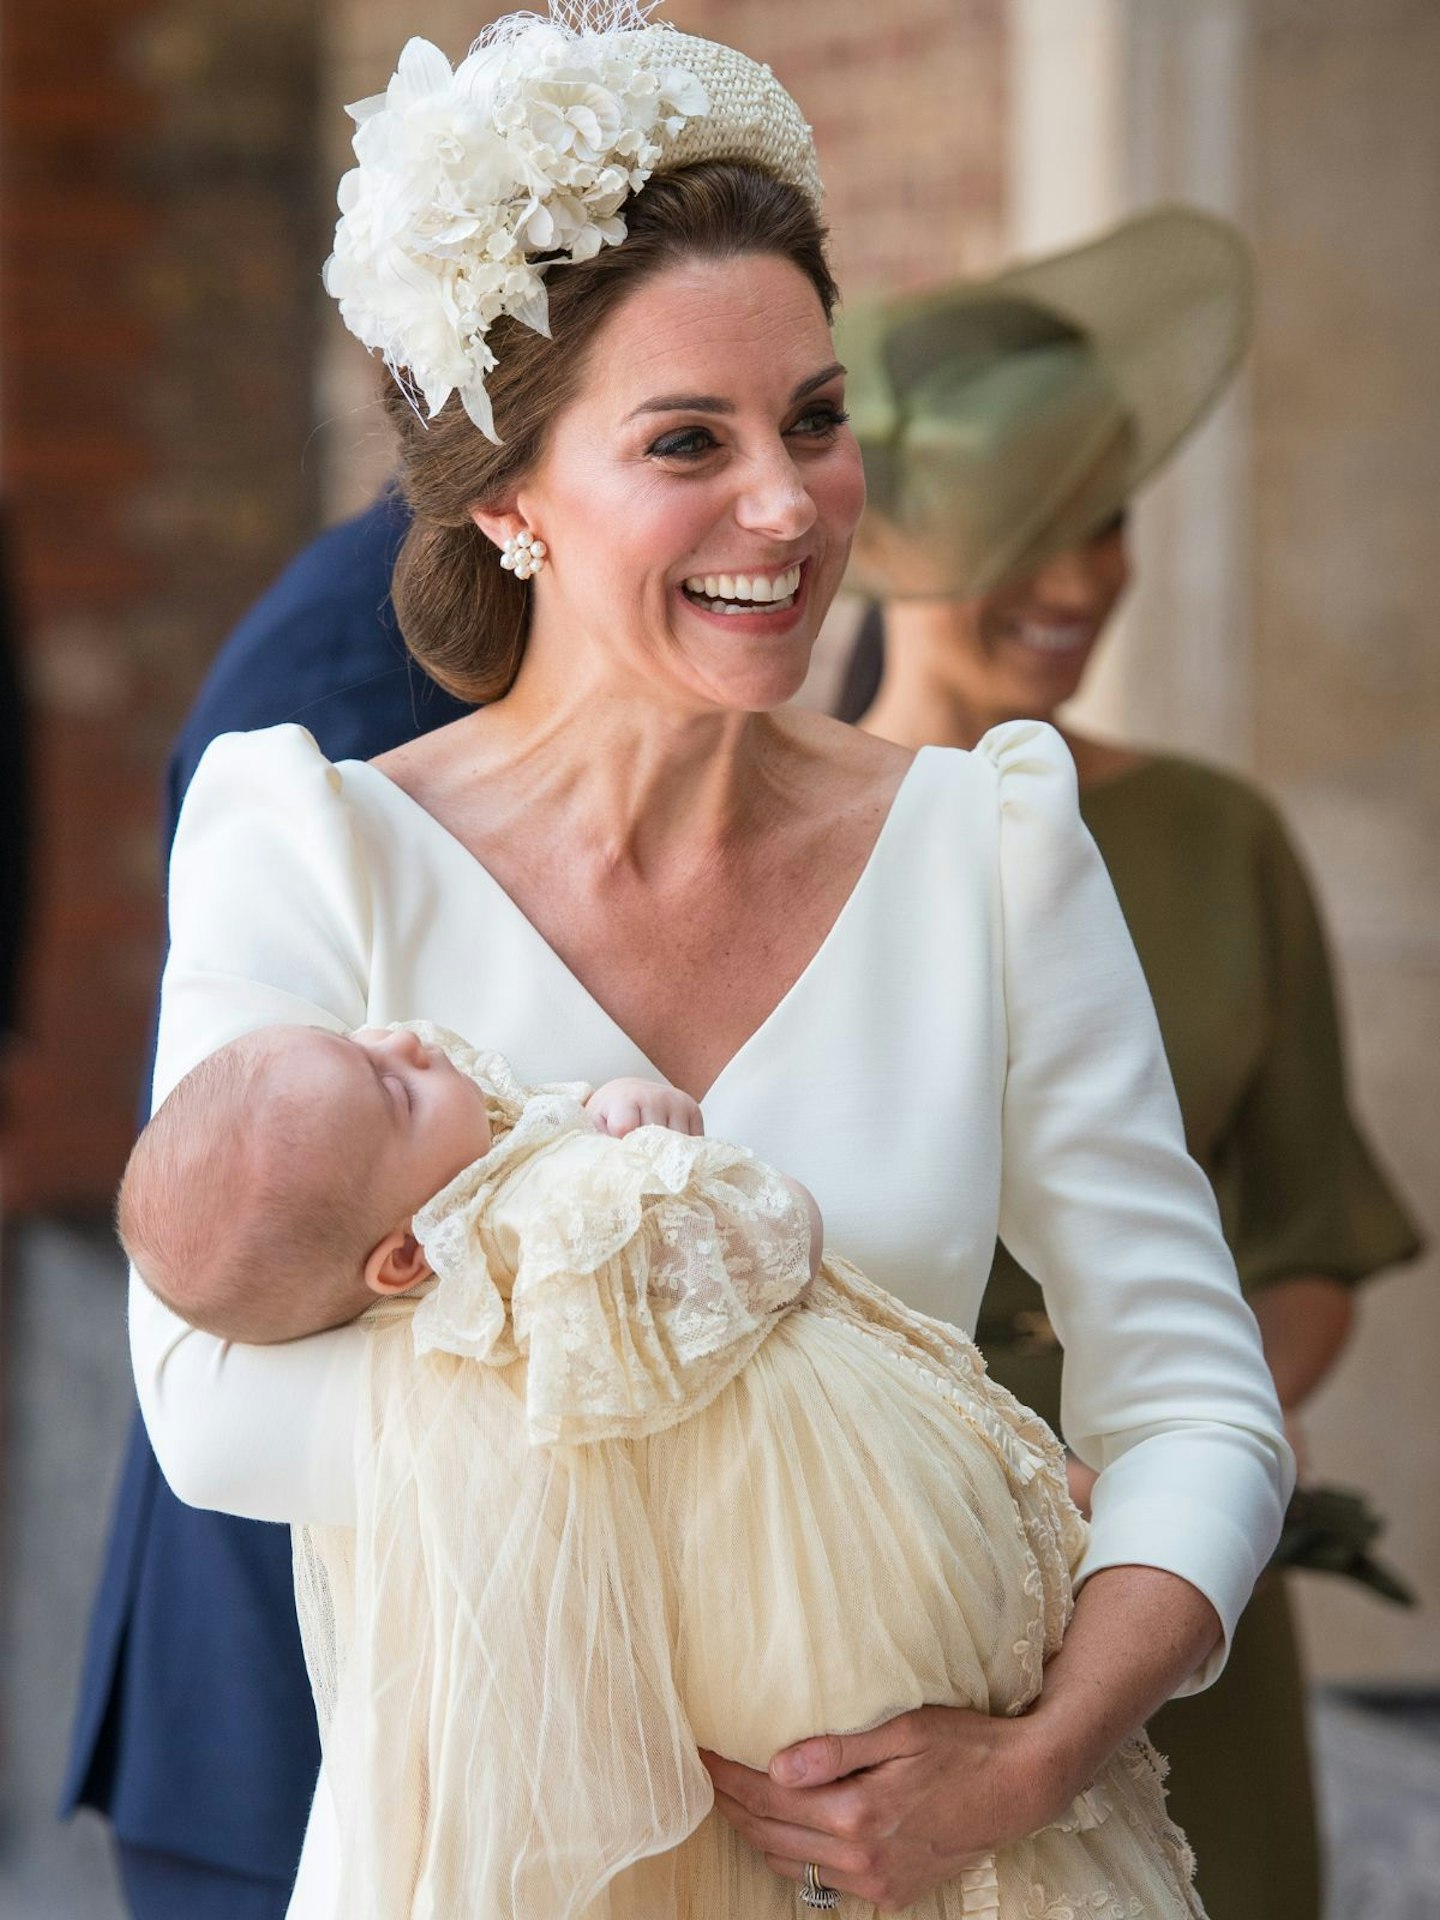 Kate Middleton carries Prince Louis as they arrive for his christening service at St James's Palace - Getty Images